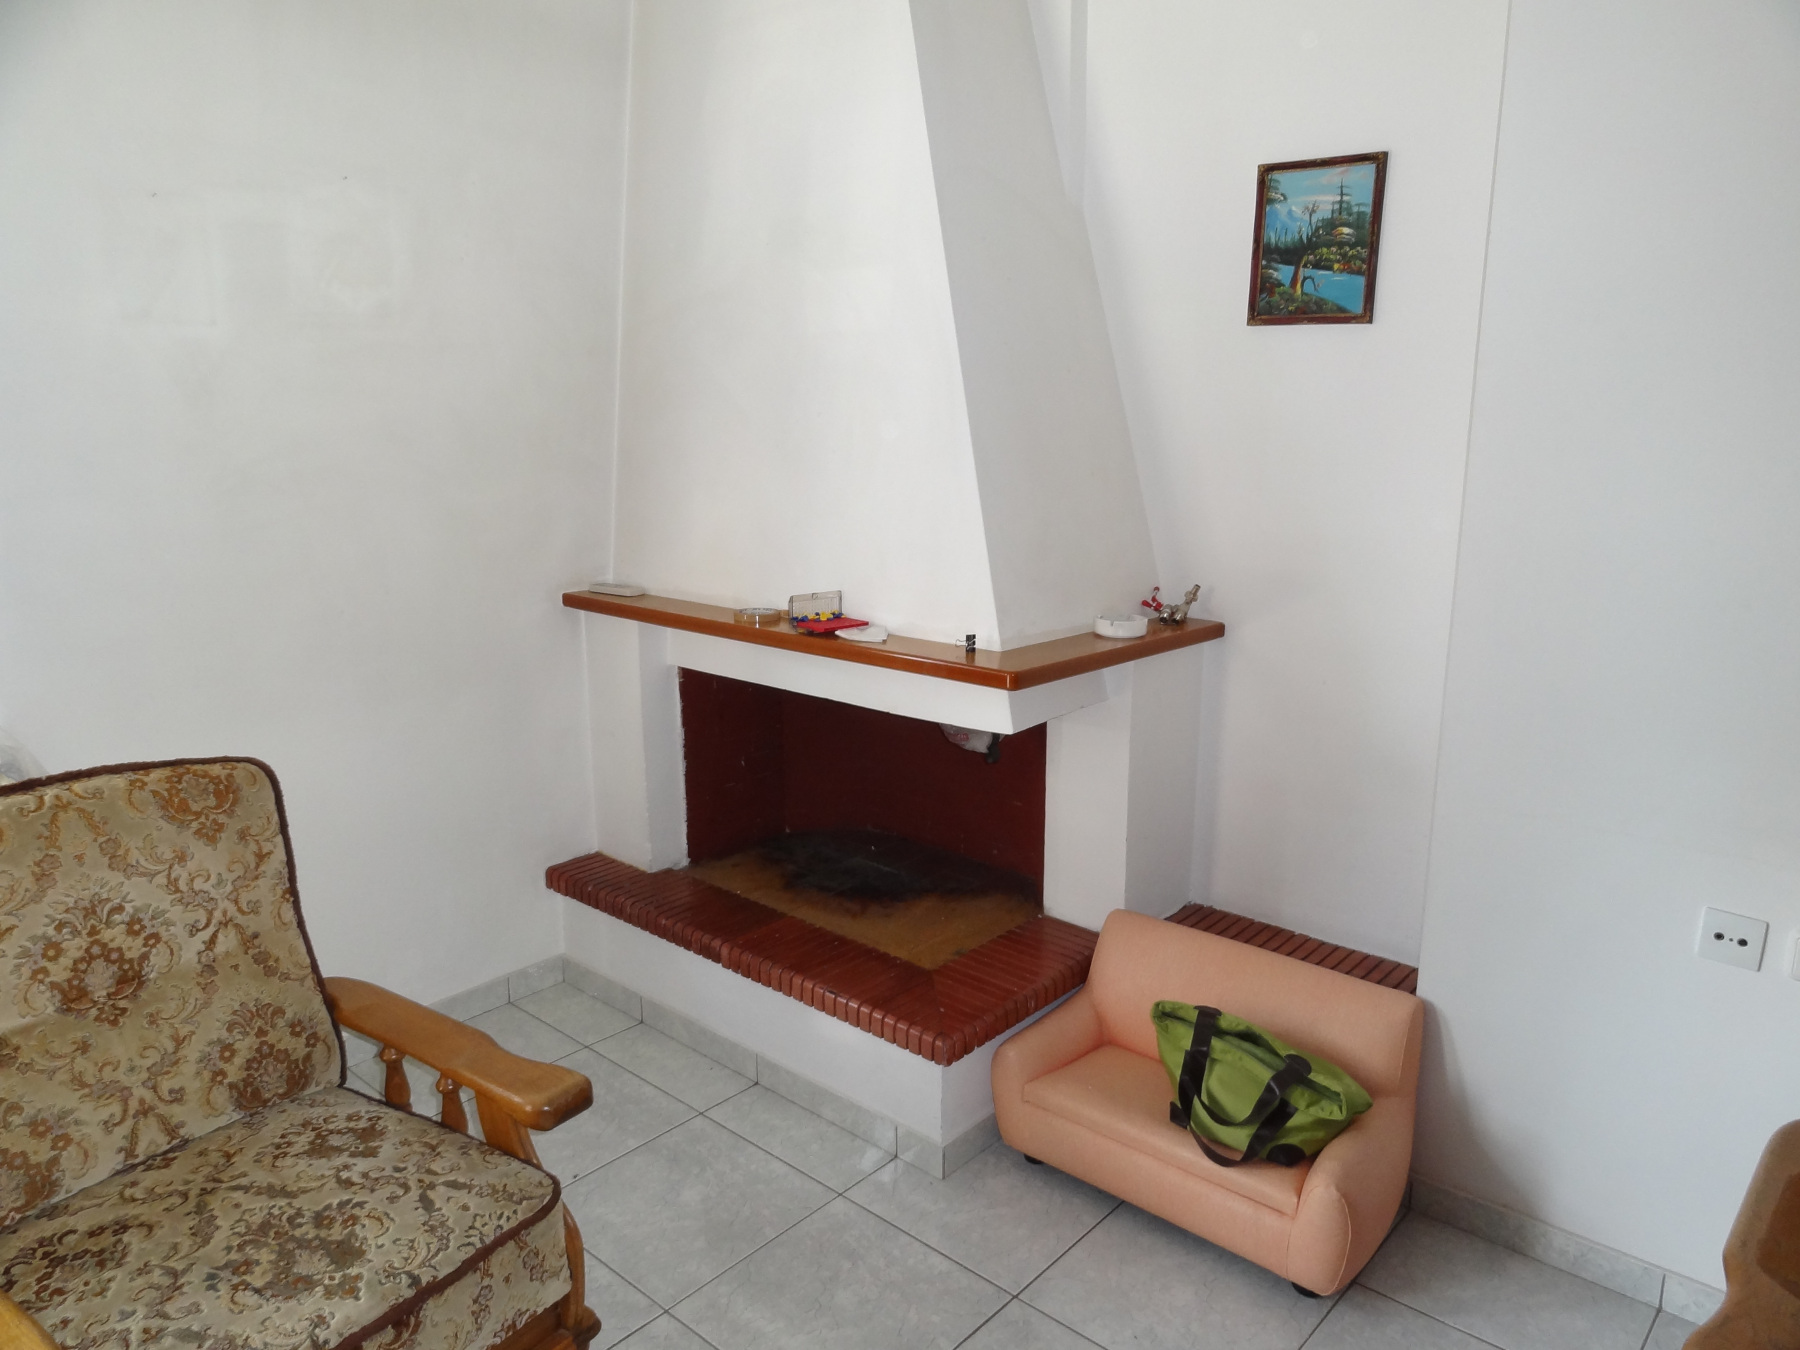 2 bedrooms apartment for rent, 86 sq.m. 1st floor in Platanos area near the center of Ioannina